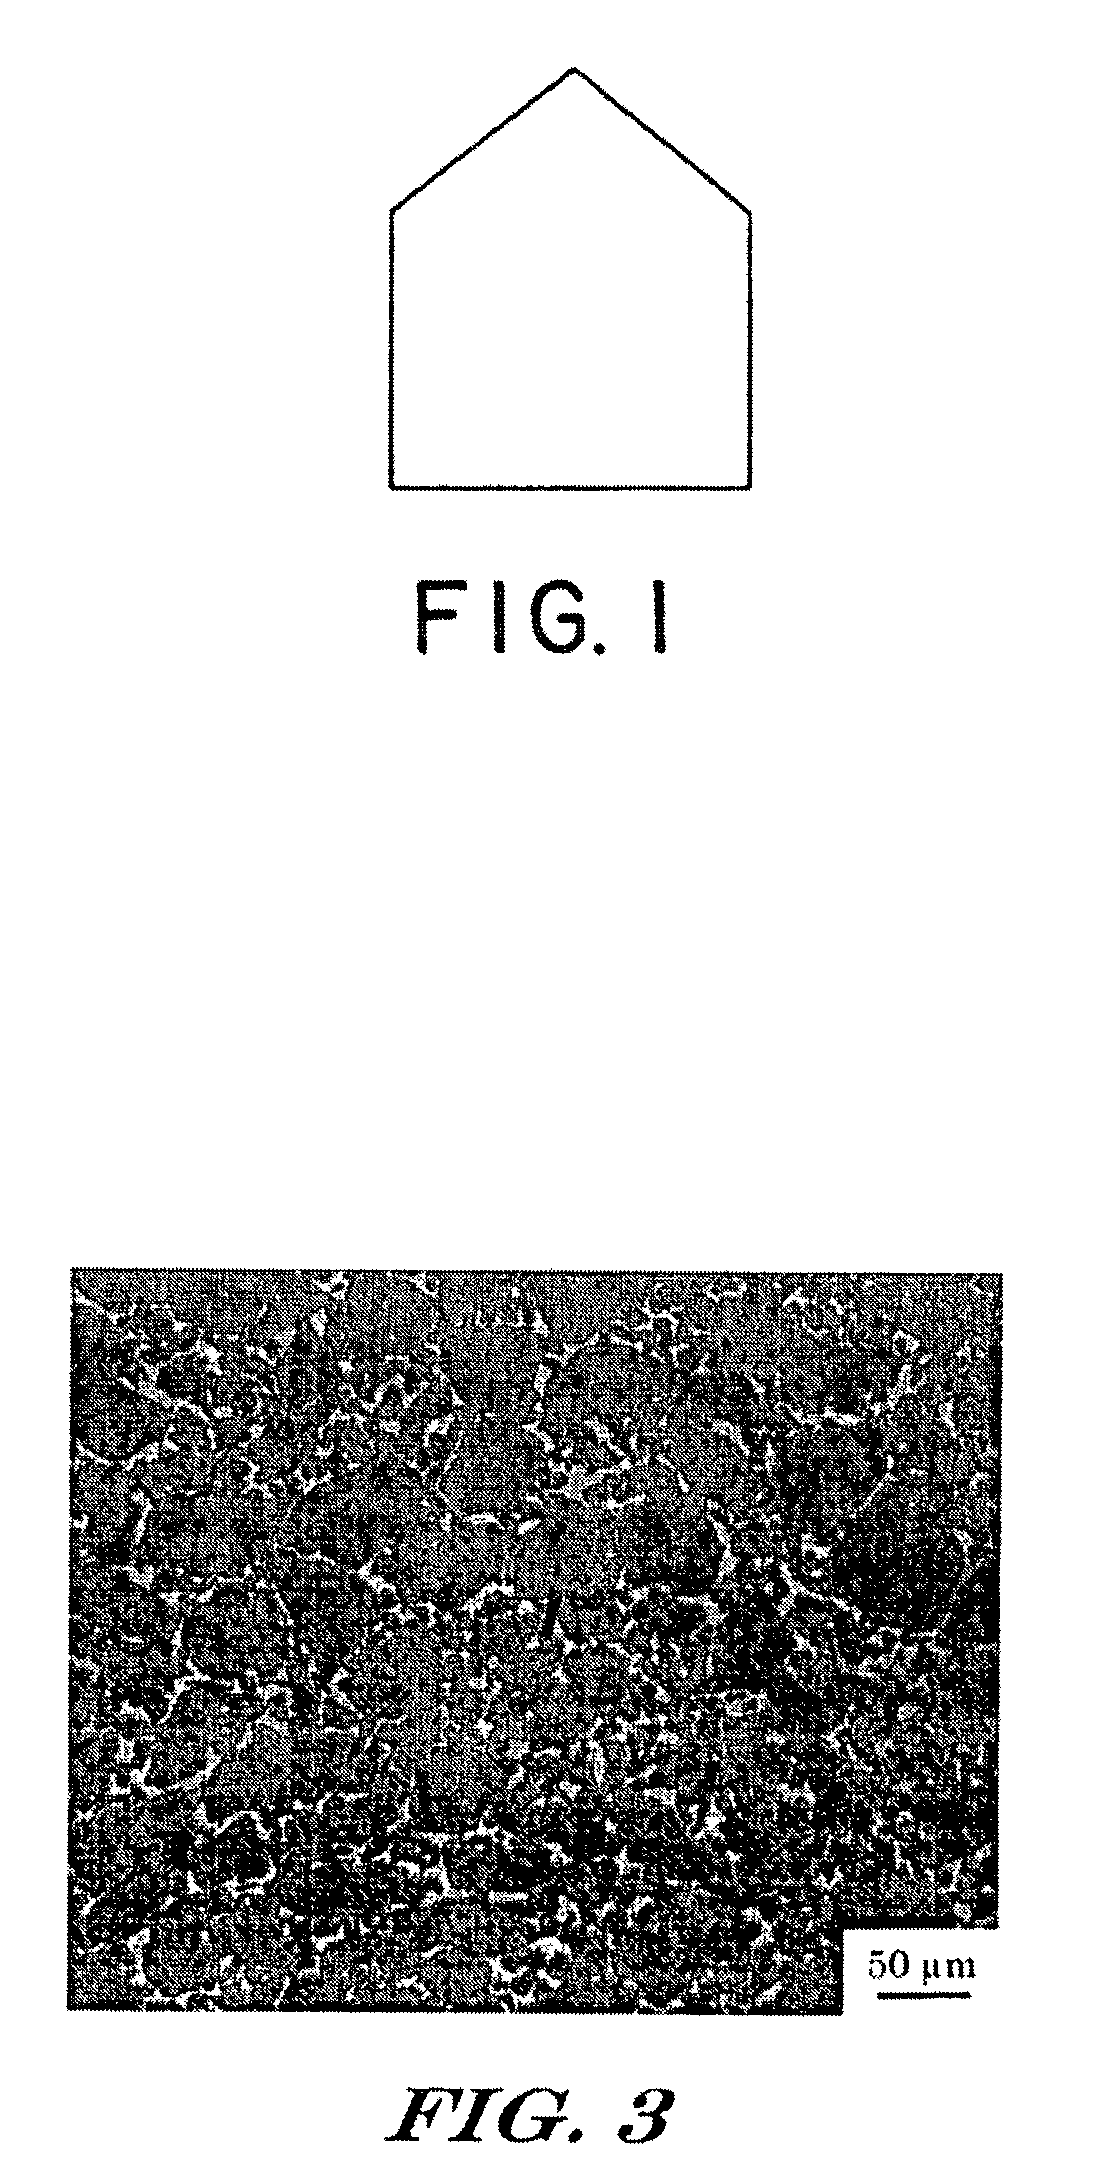 Toughness enhanced silicon-containing composite bodies, and methods for making same